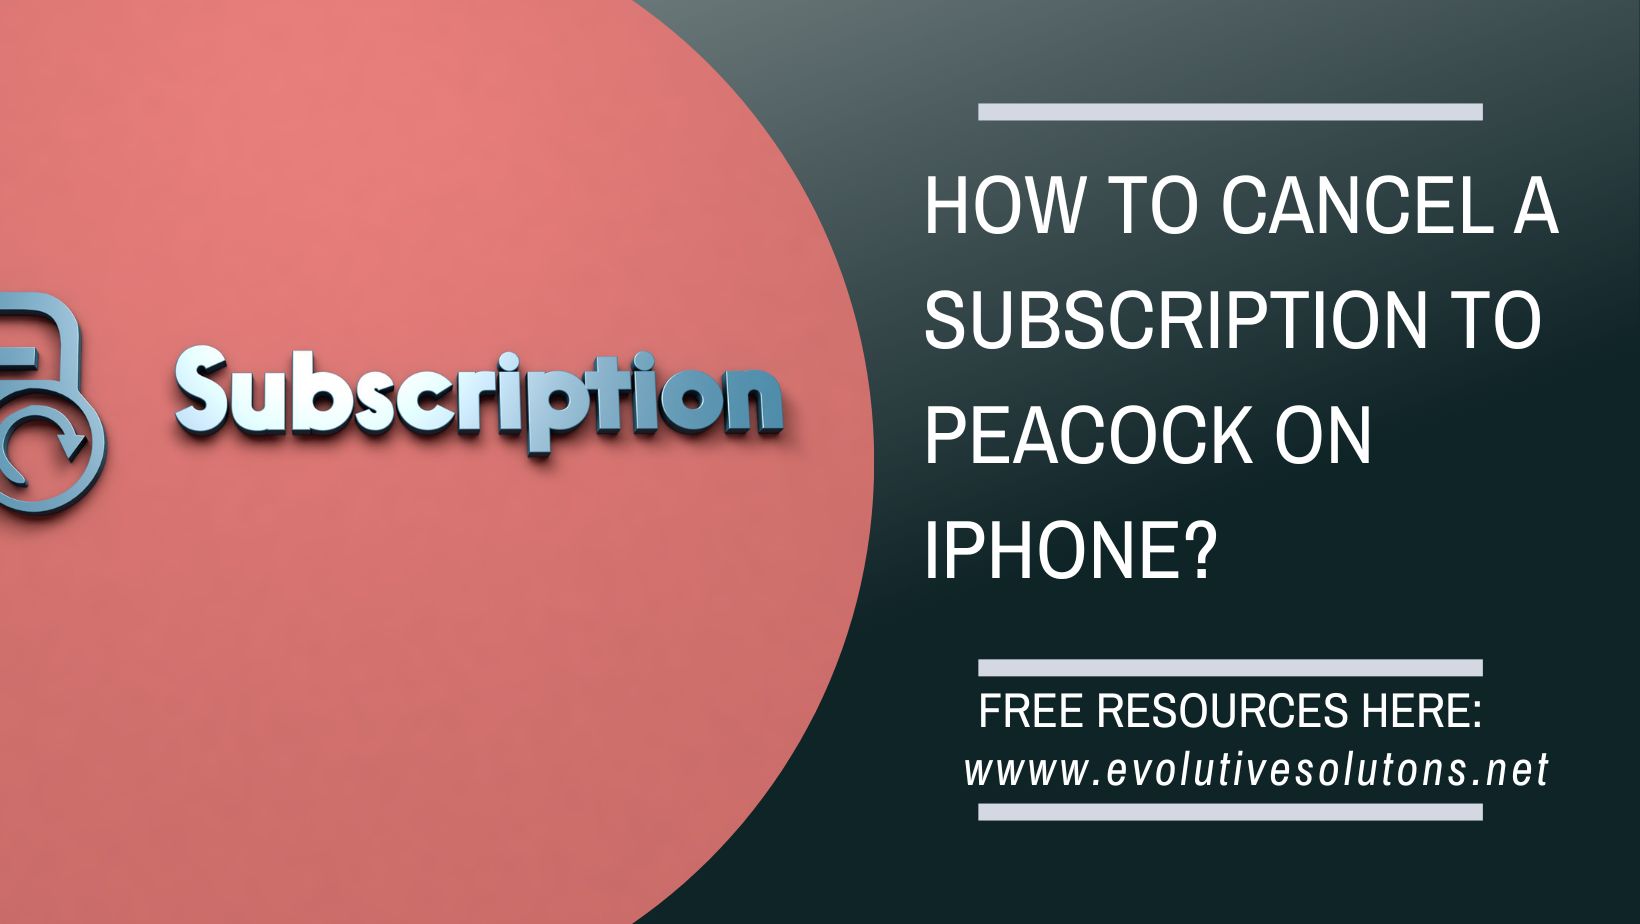 How to Cancel a Subscription to Peacock on IPhone?